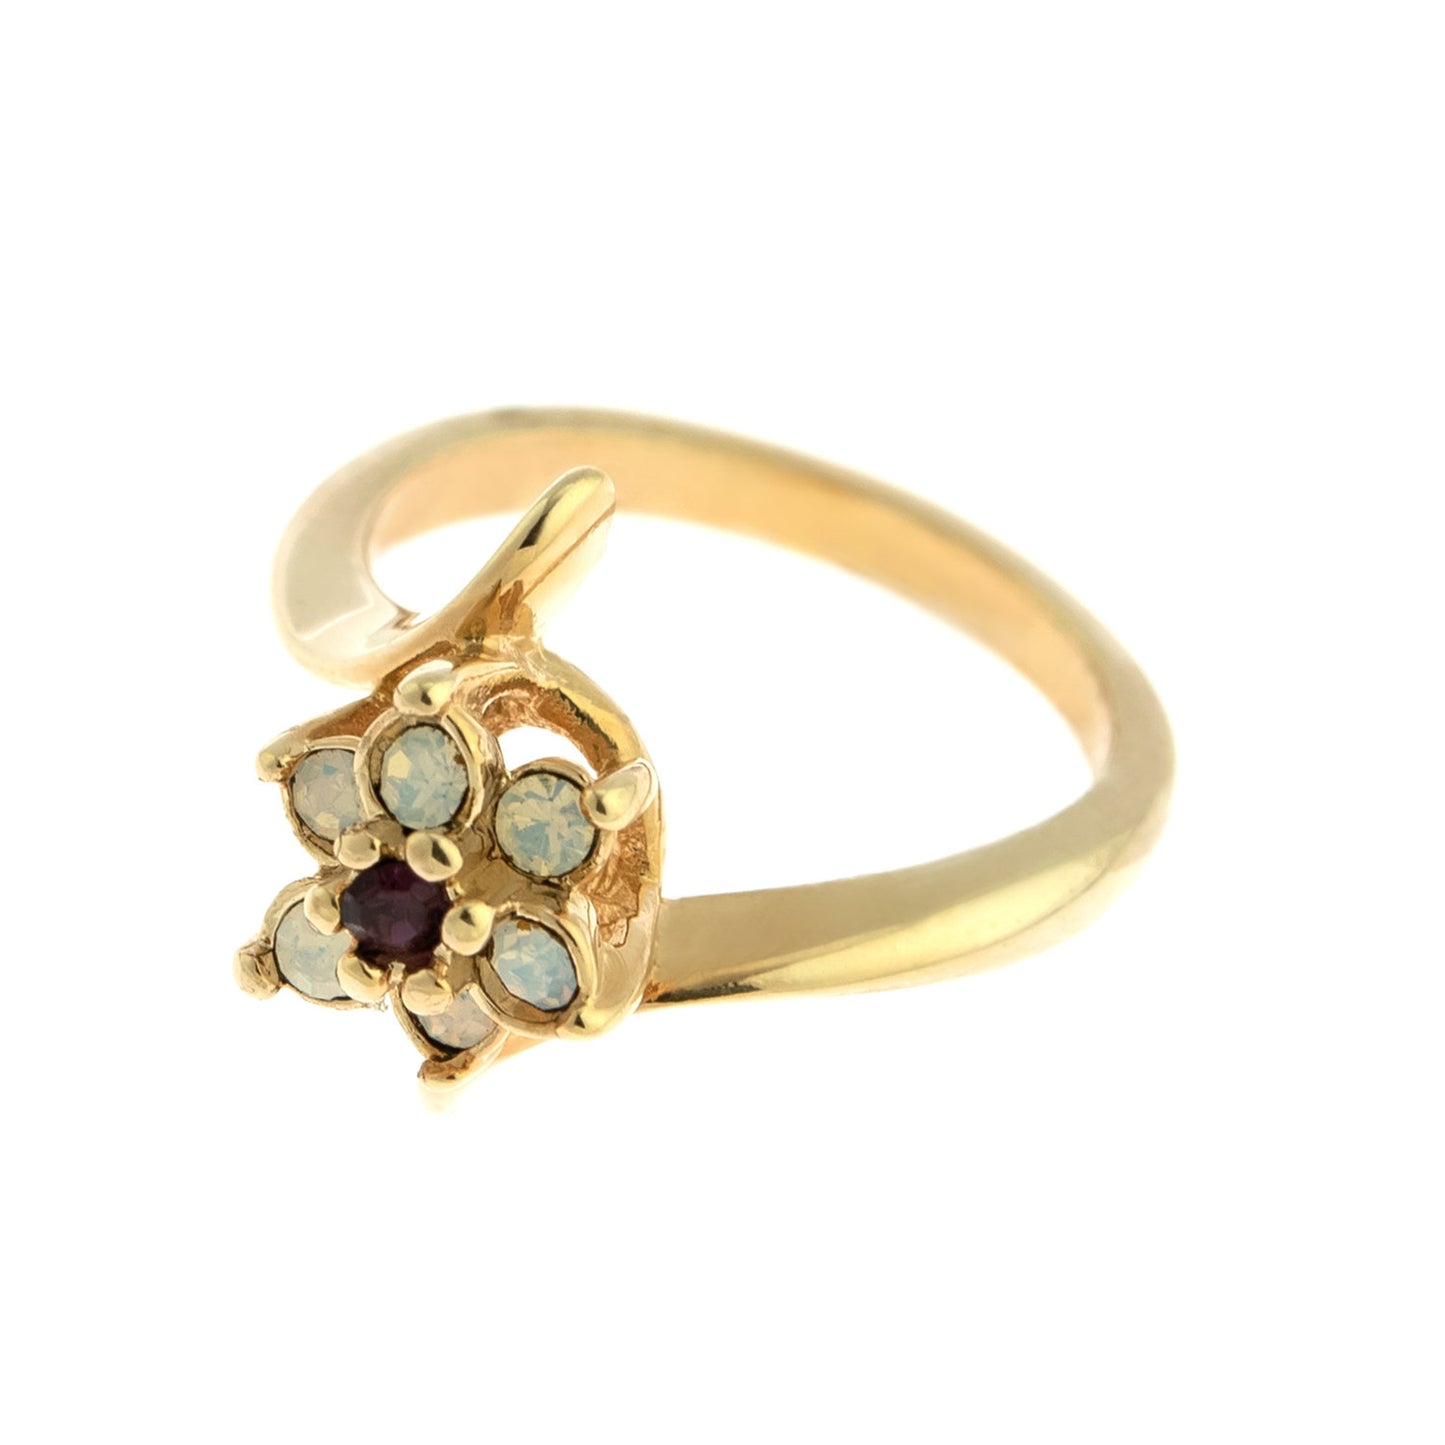 Vintage 1970's Amethyst Crystal and Genuine Pinfire Opal Ring 18kt Yellow Gold Electroplated Ring